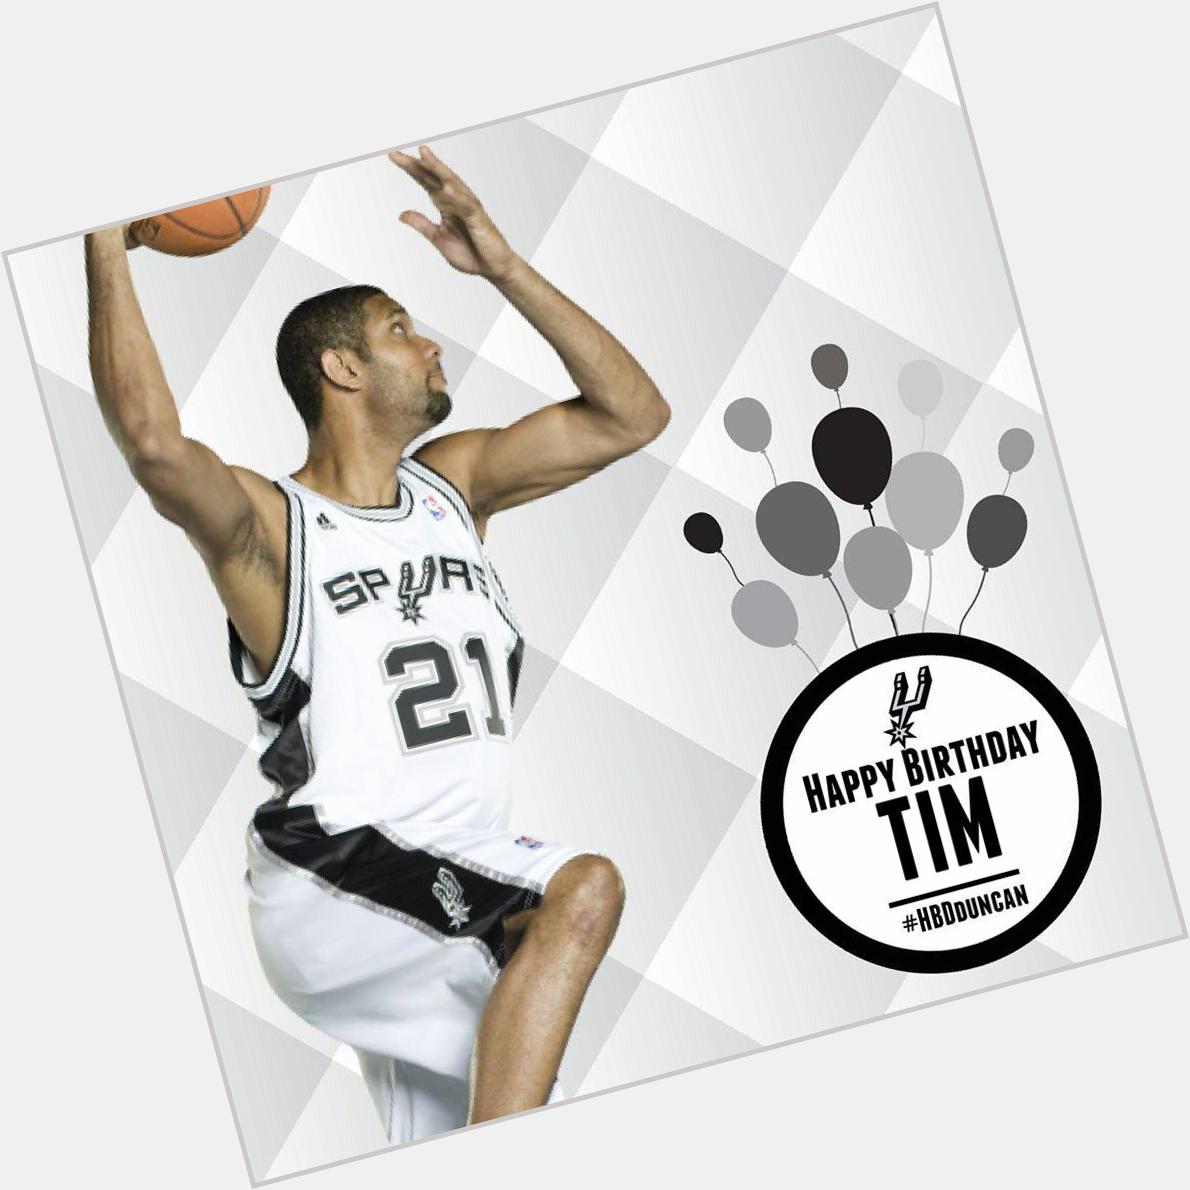 Happy birthday Tim Duncan! one of the greatest to ever play in the NBA   